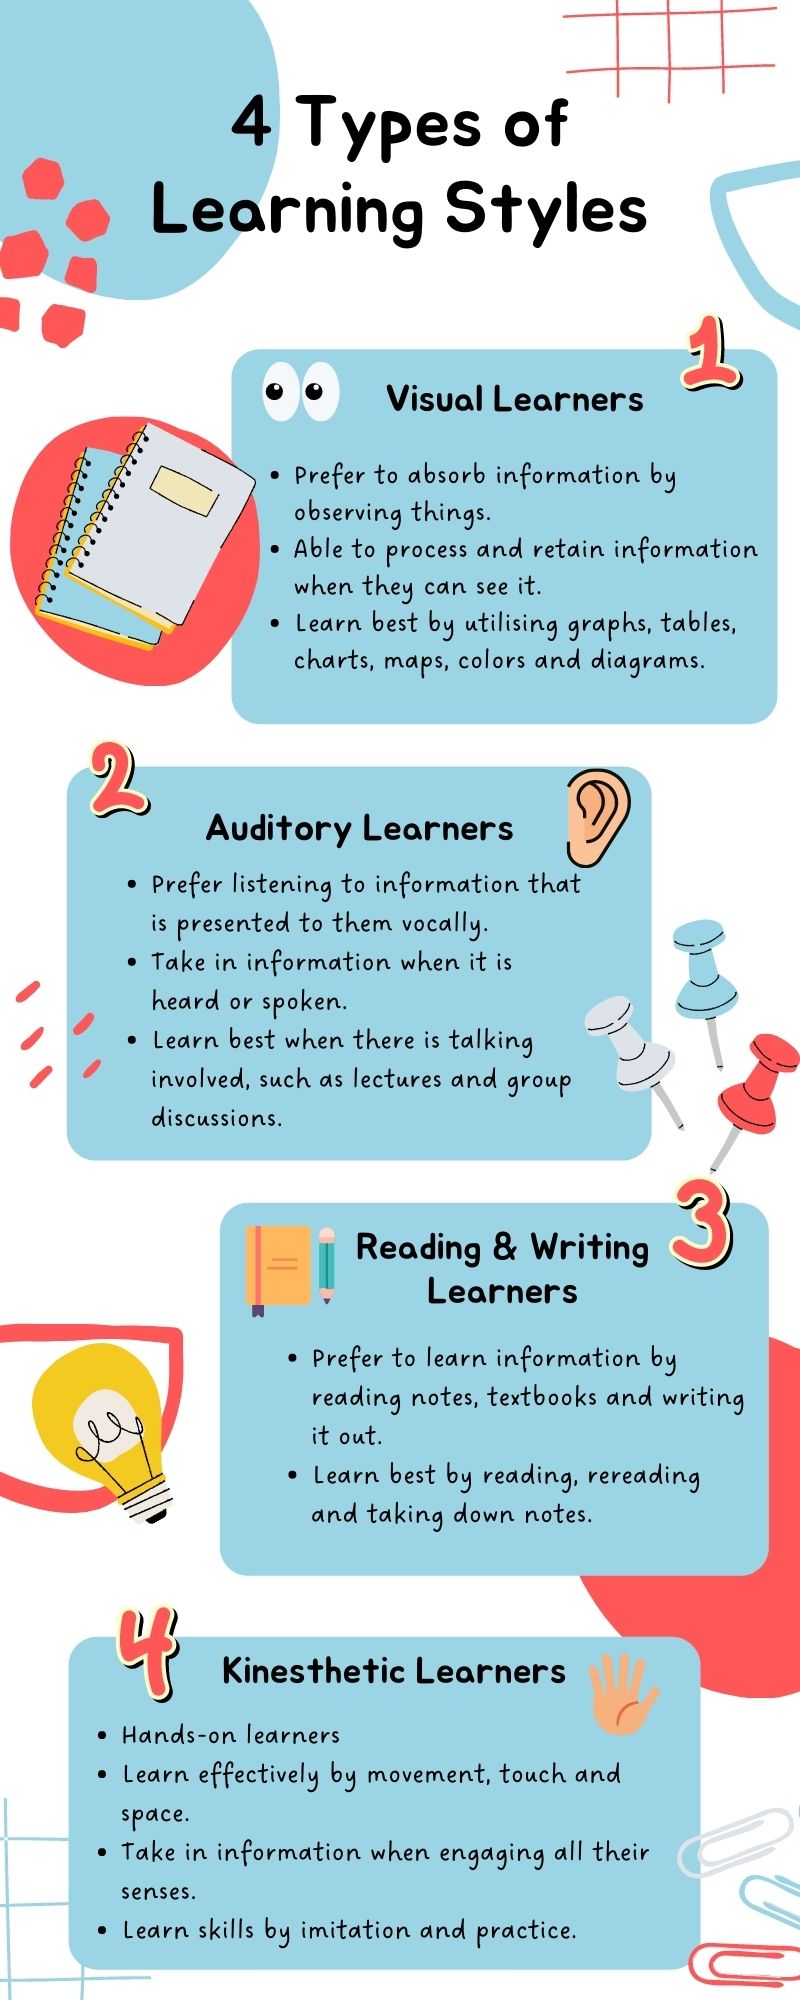 recent research on learning styles